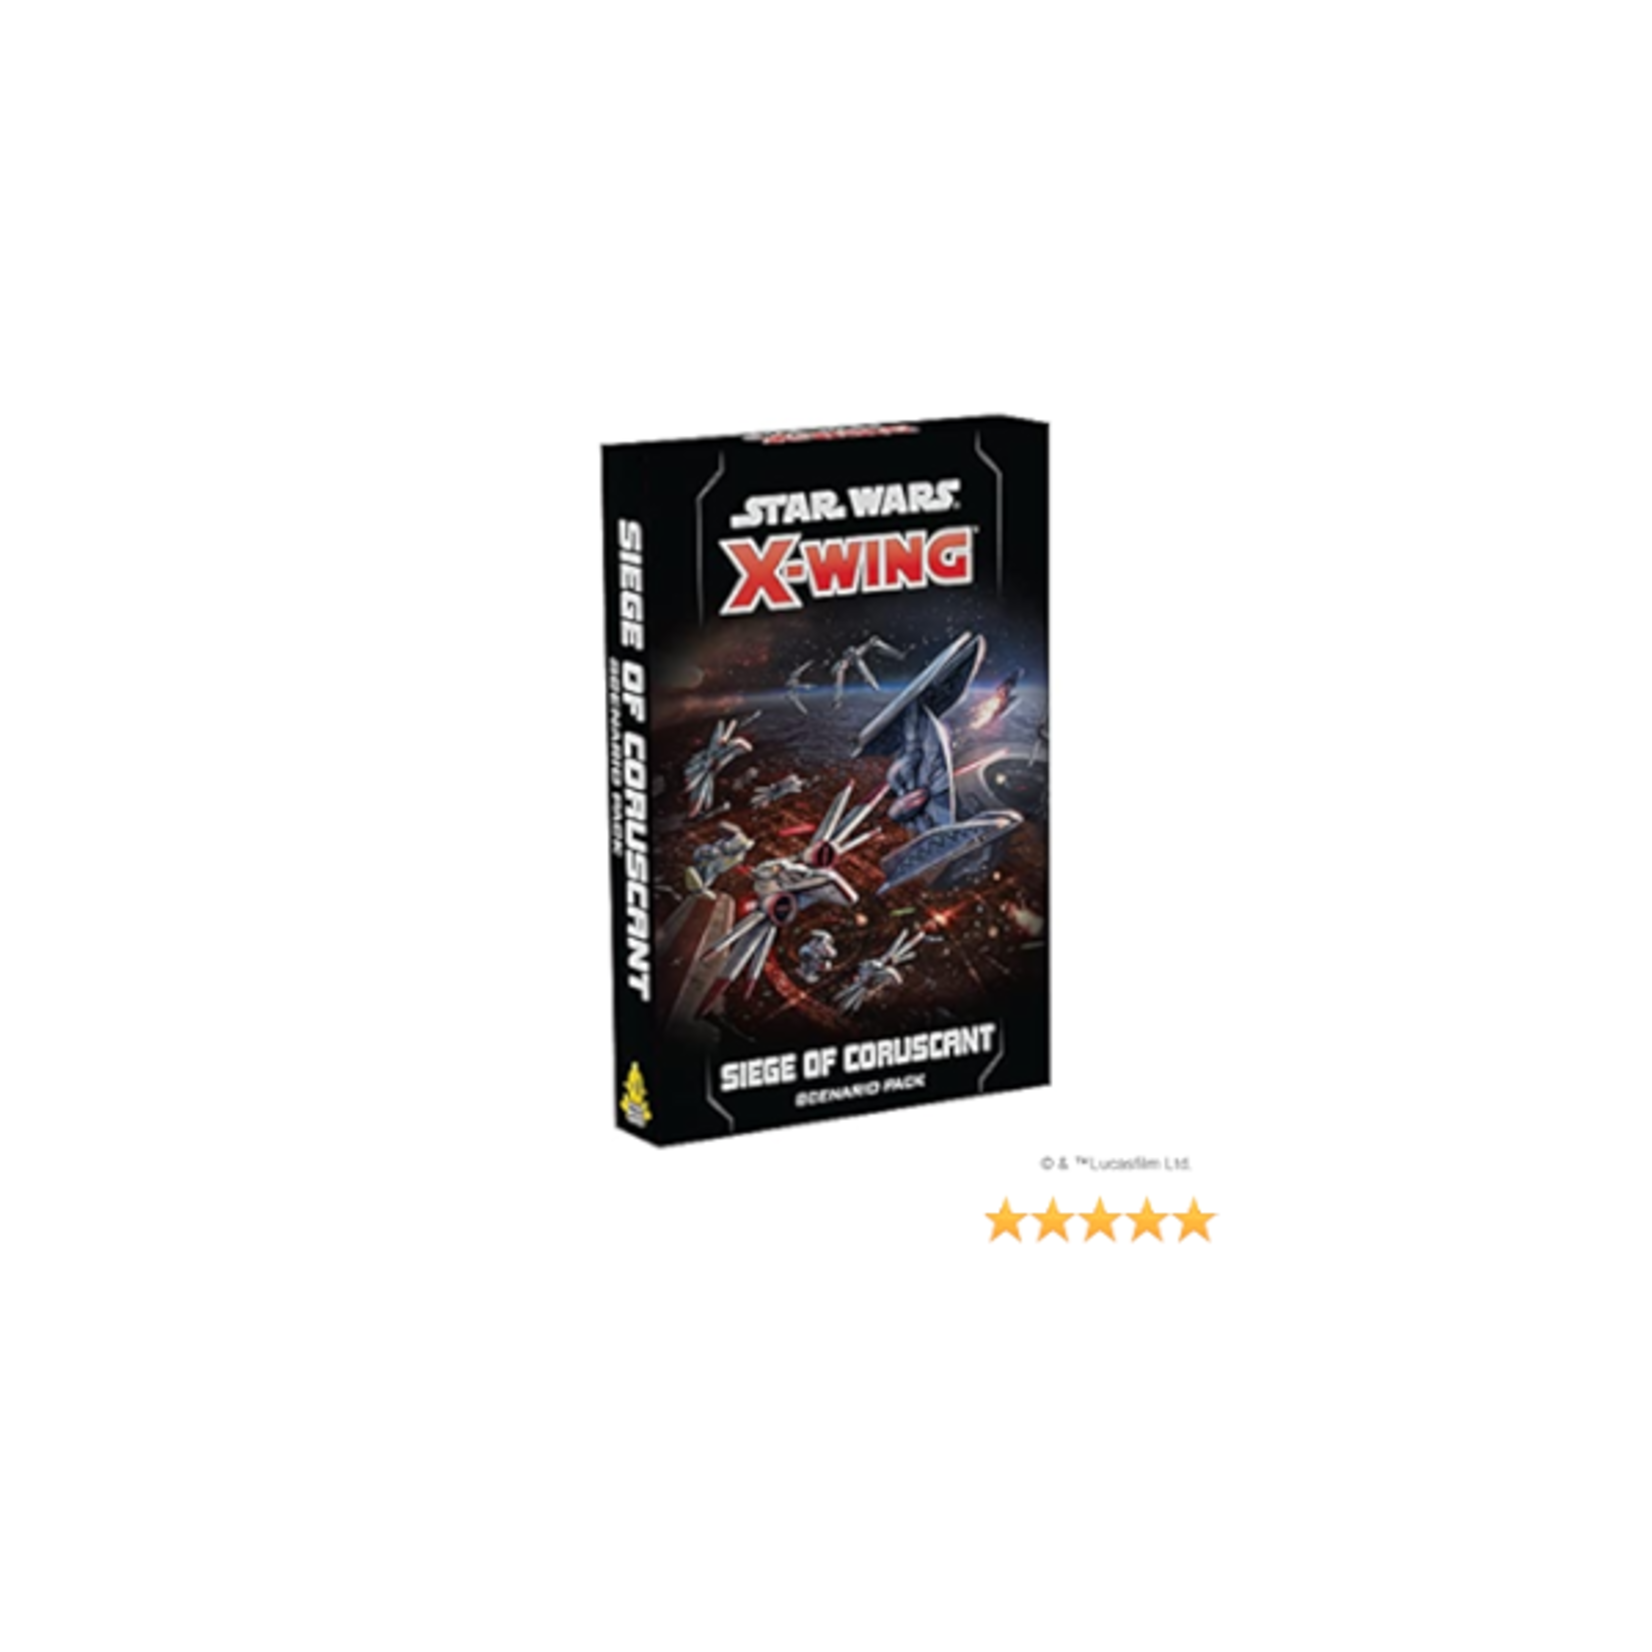 Atomic Mass Games Star Wars: X-Wing 2nd Ed - Siege of Coruscant Scenario Pack